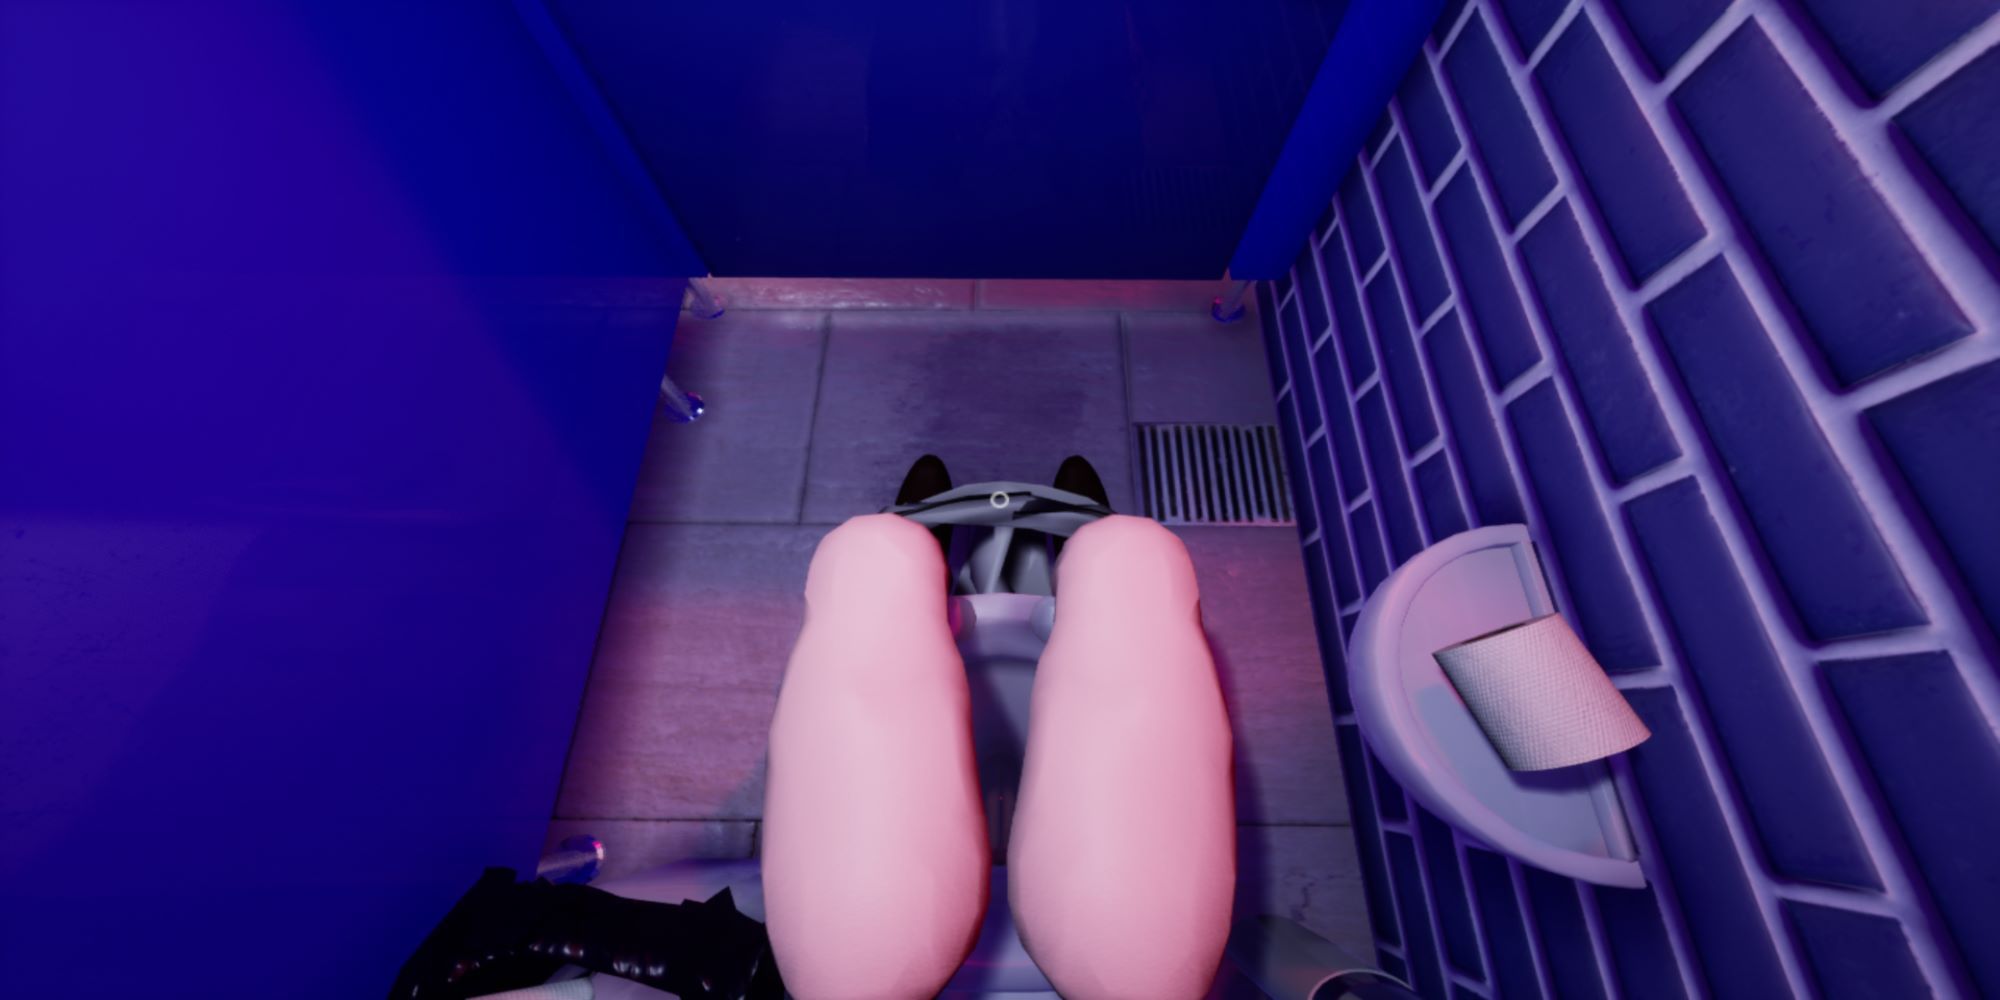 The player sits on the toilet in a blue-tiled bathroom stall in The Toilet Chronicles: Part 1.